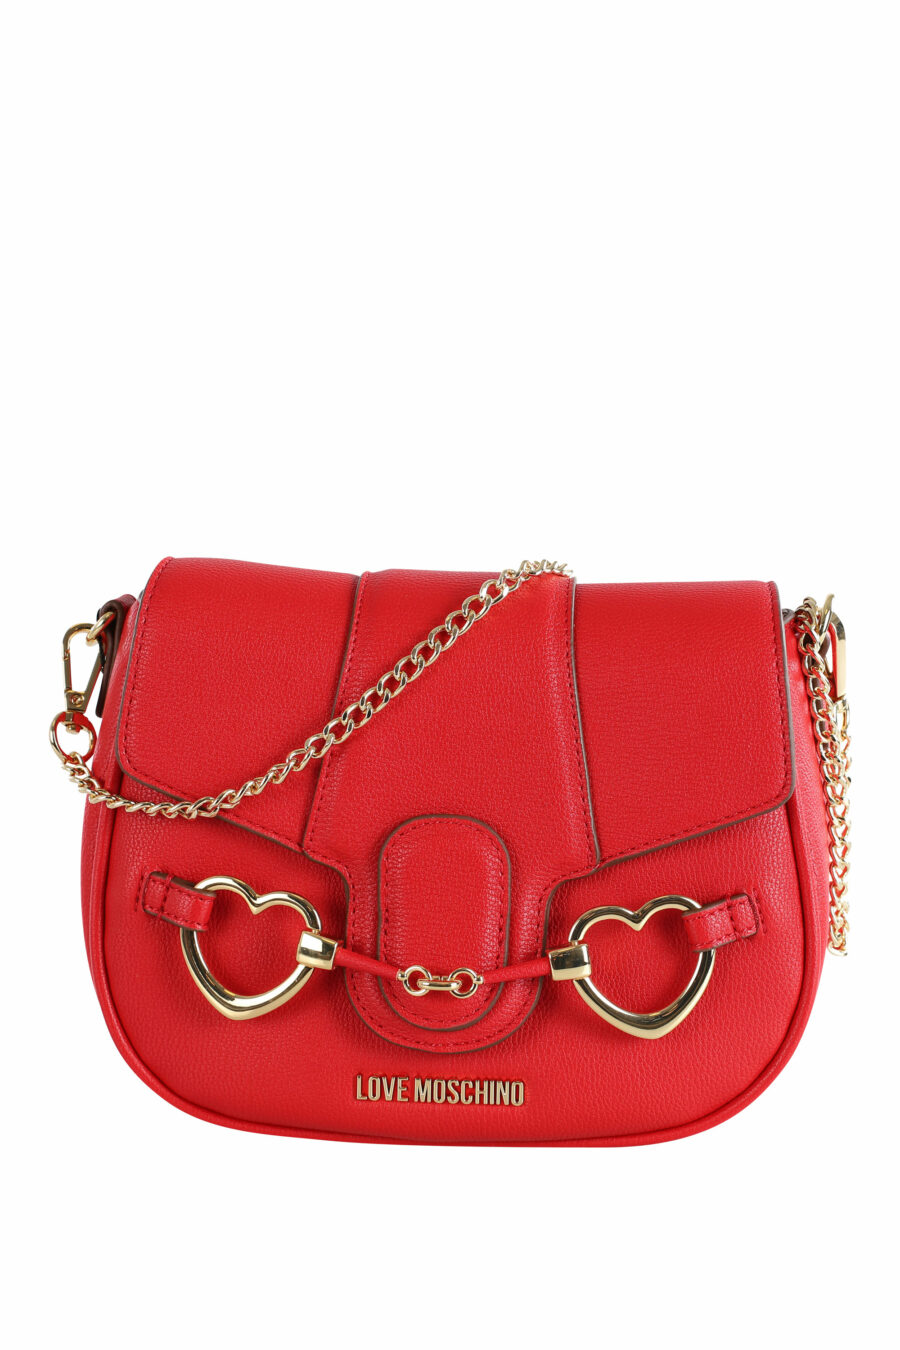 Red shoulder bag with mini-logo and hearts in golden metal - IMG 3618